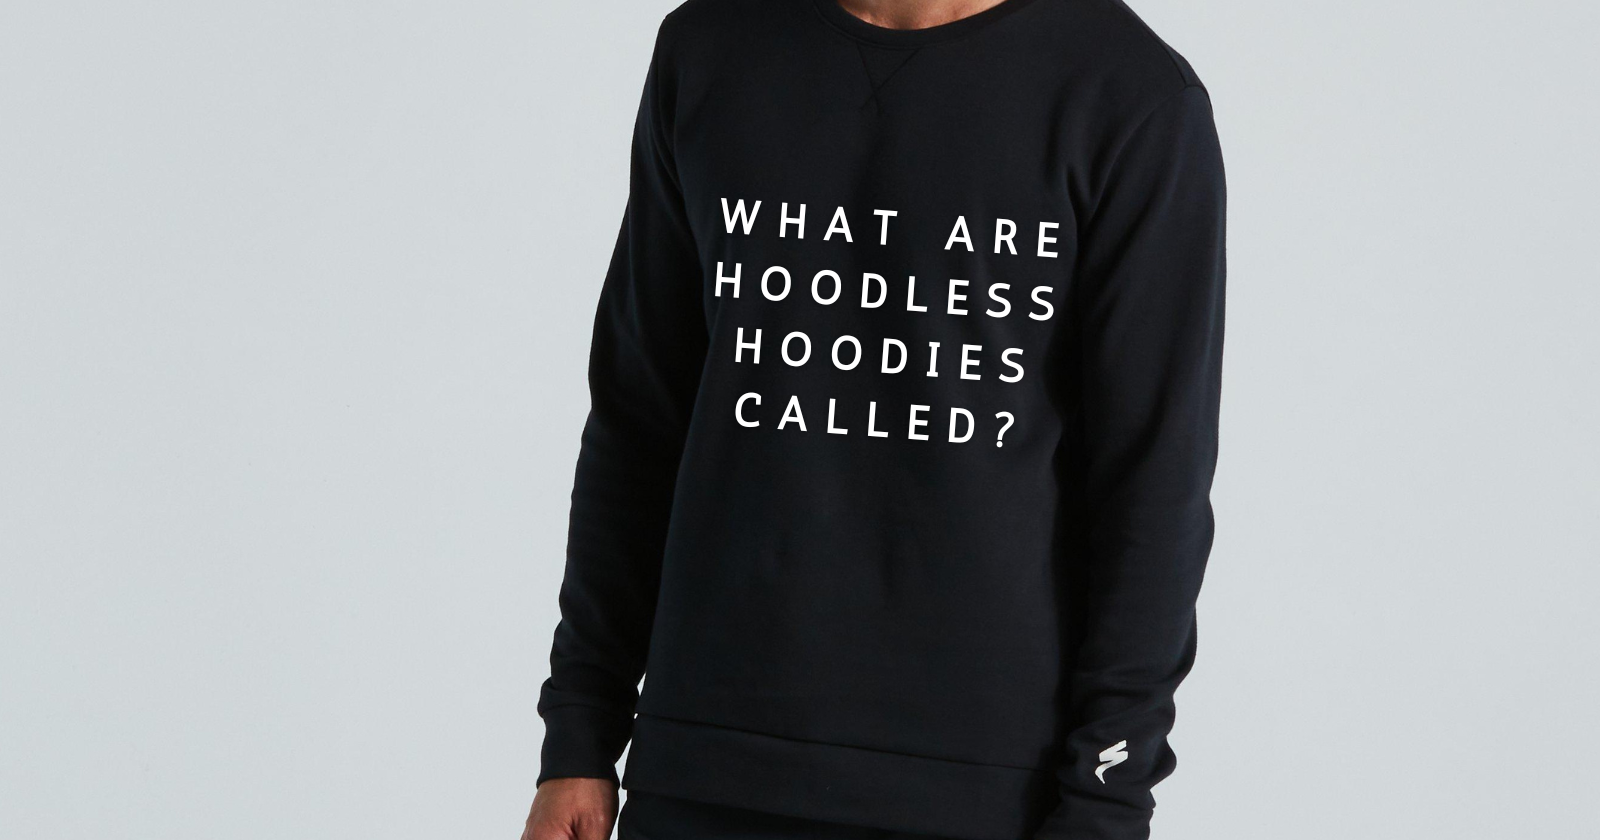 What are Hoodless hoodies called